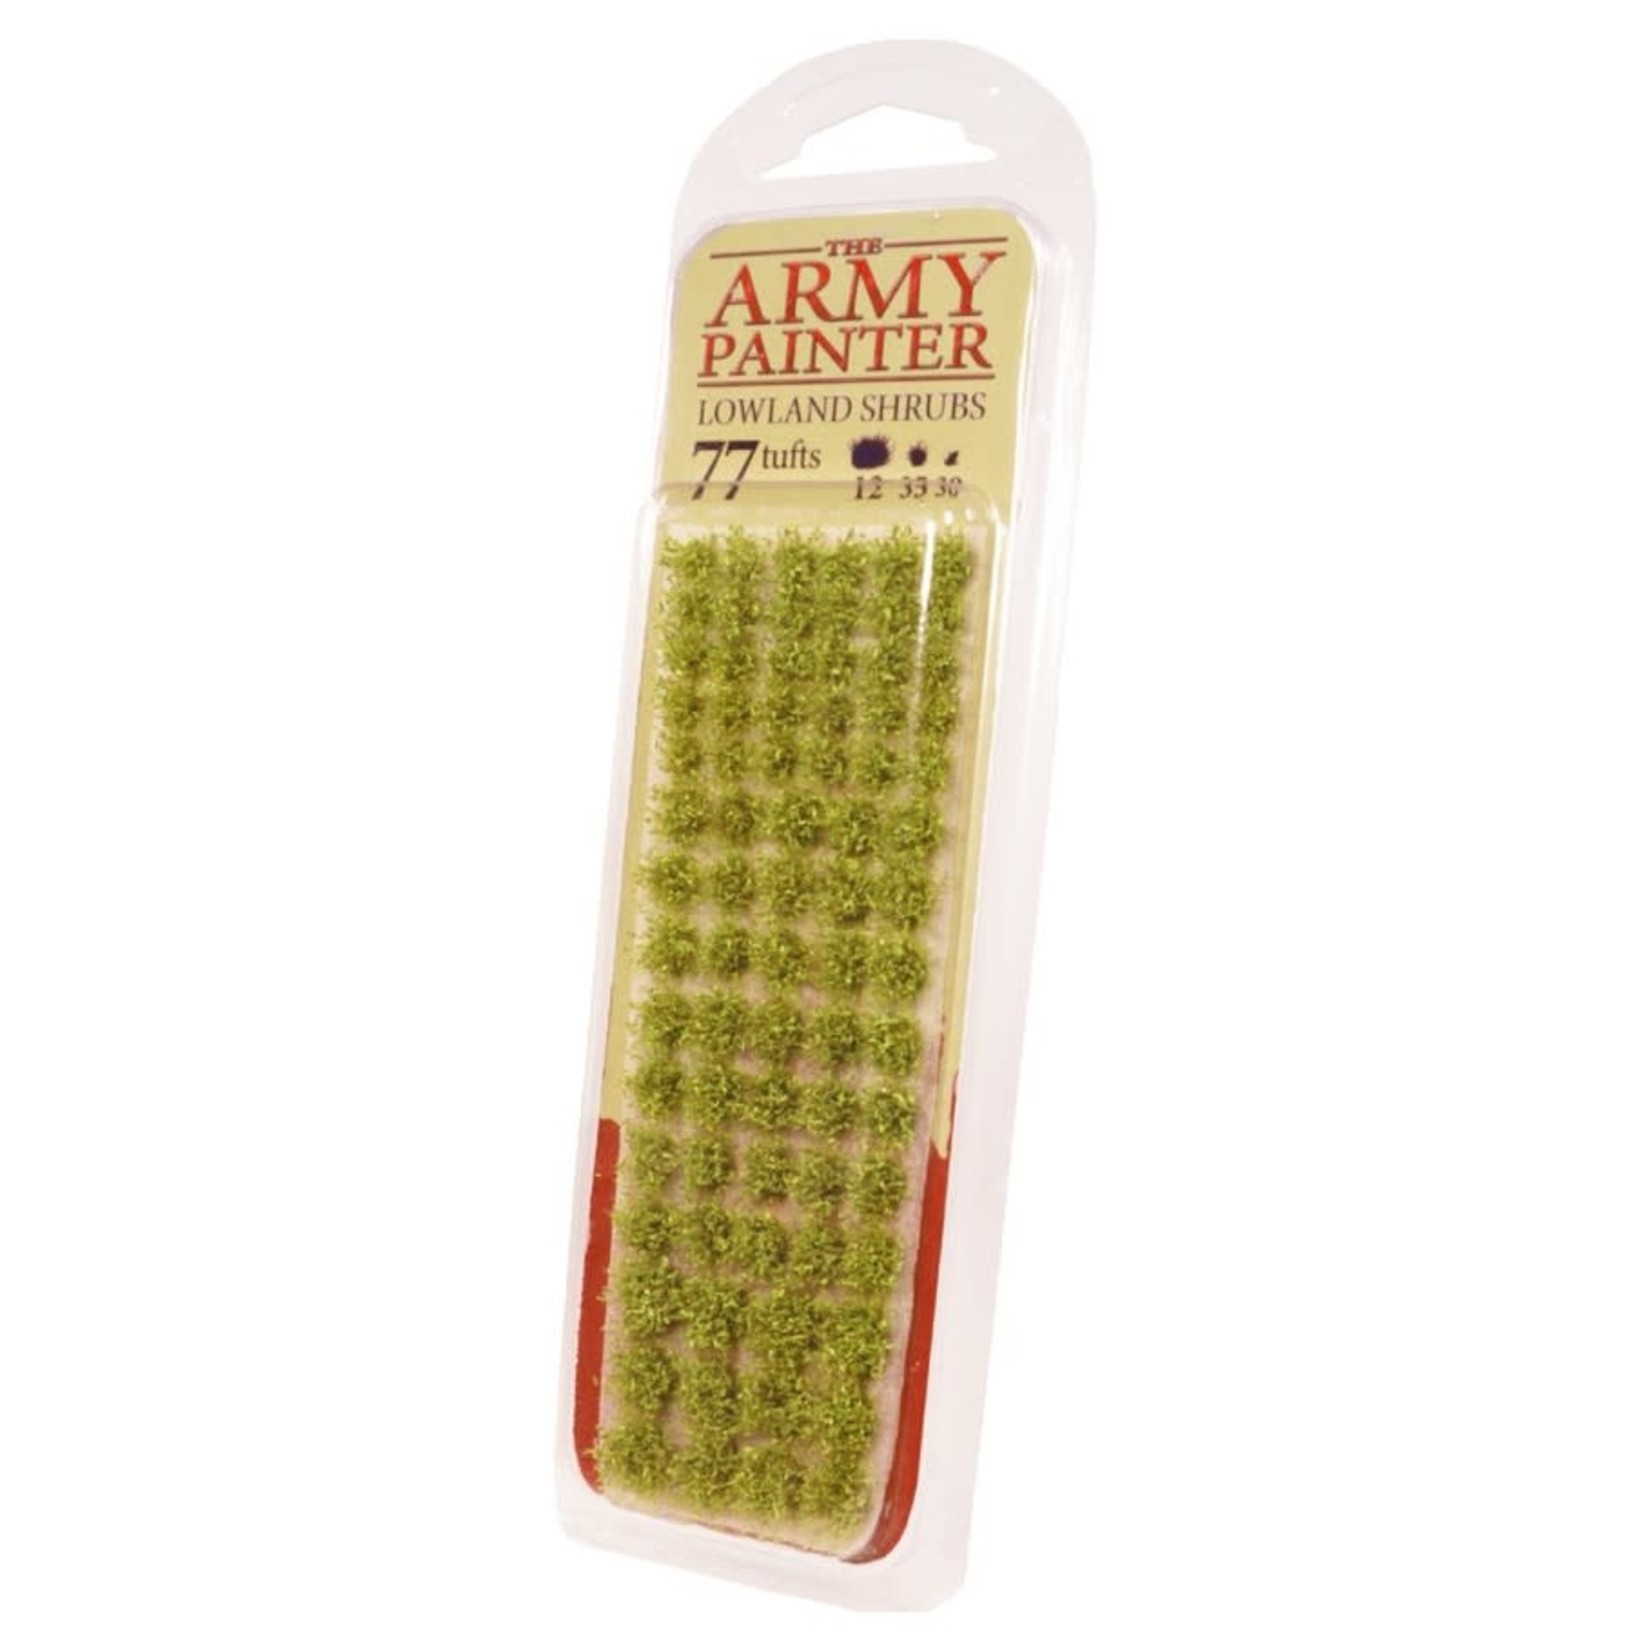 The Army Painter The Army Painter Lowland Shrubs